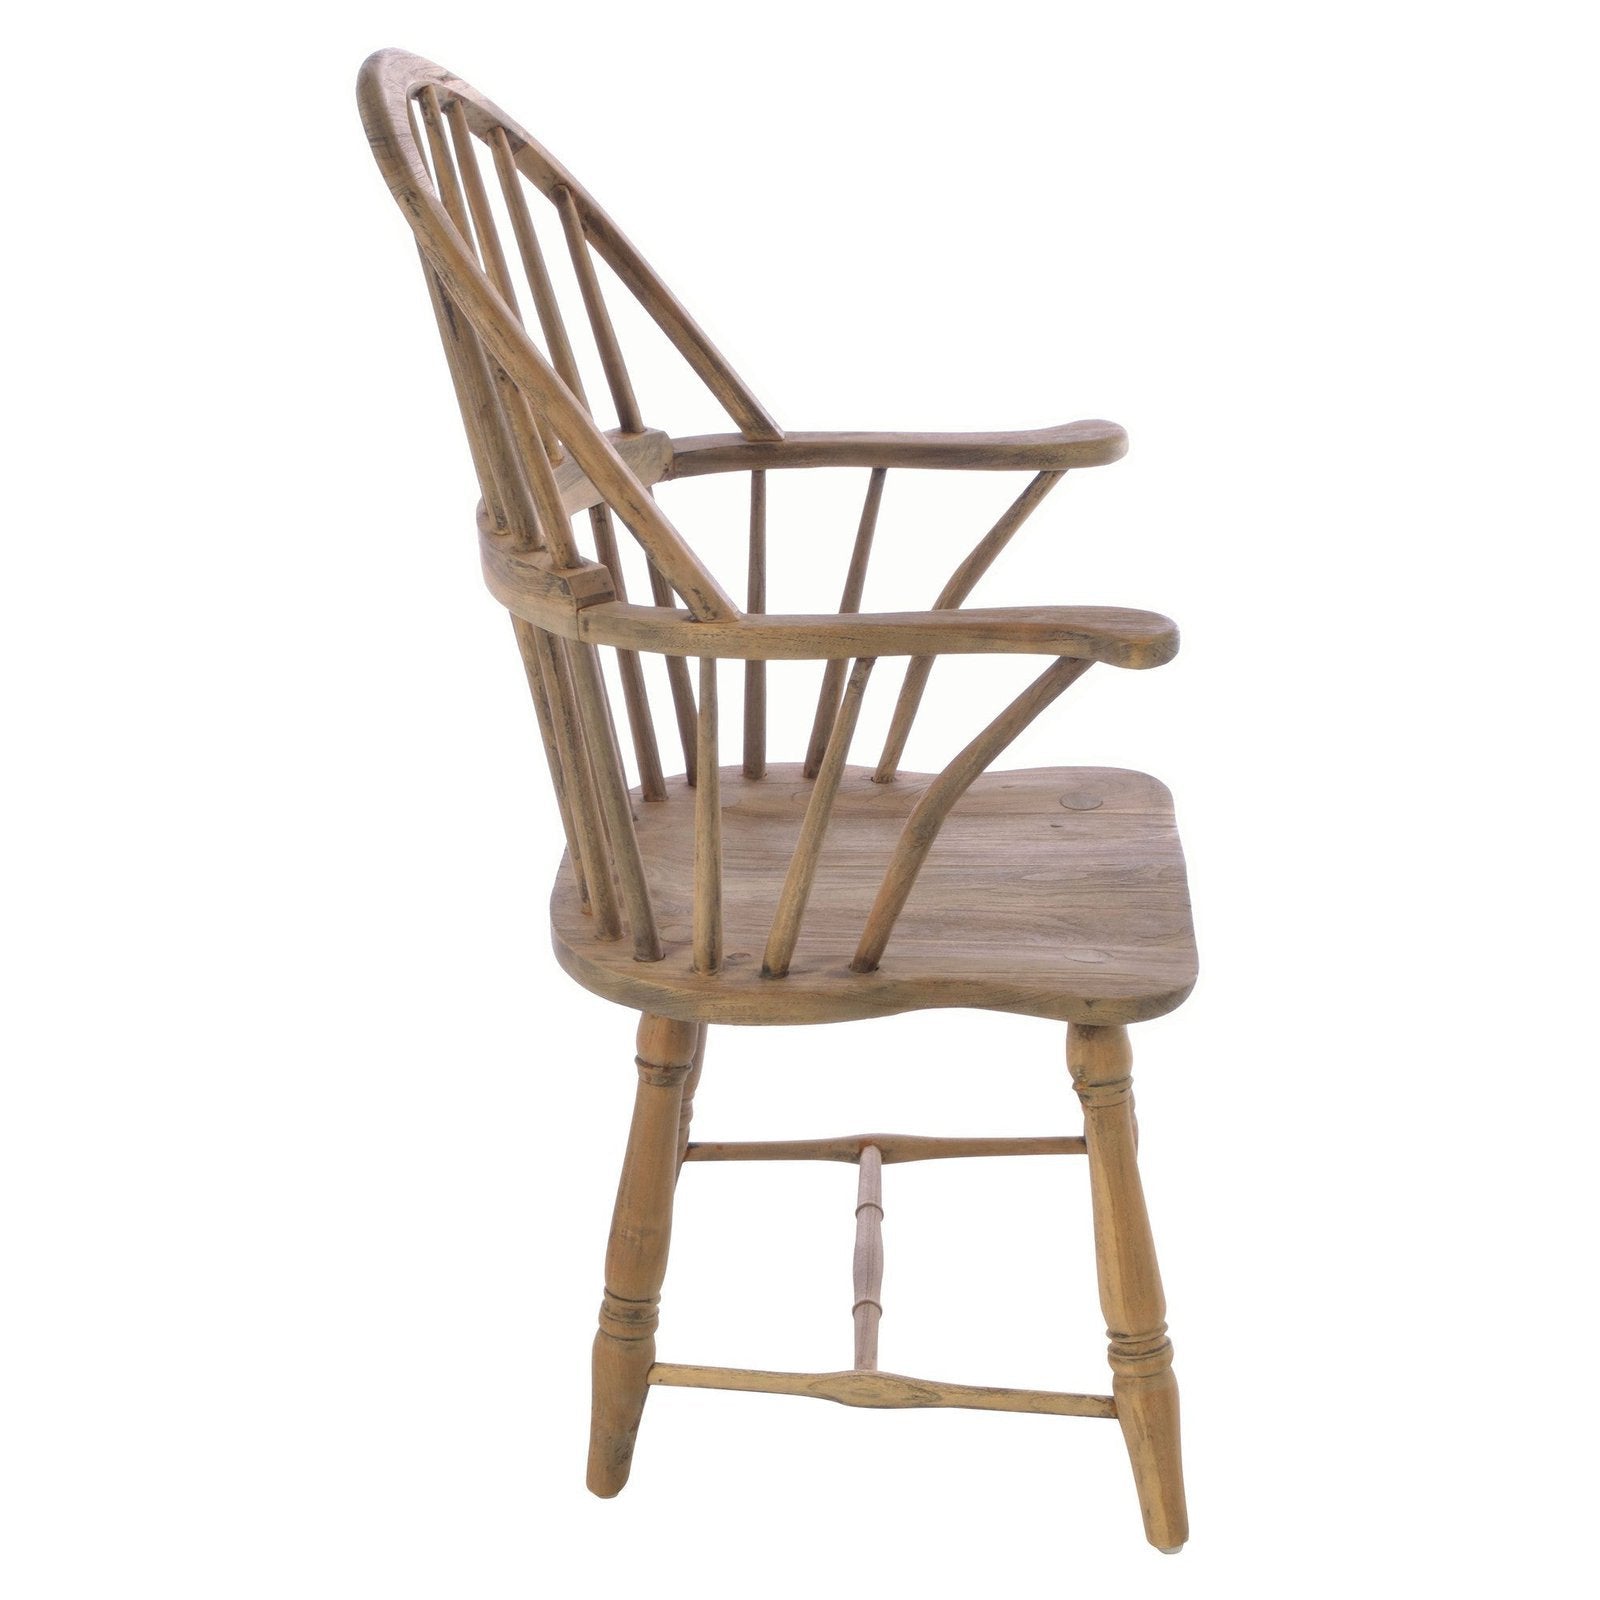 Vintage Continuous Arm Windsor Chair - Solid Mahogany Wood